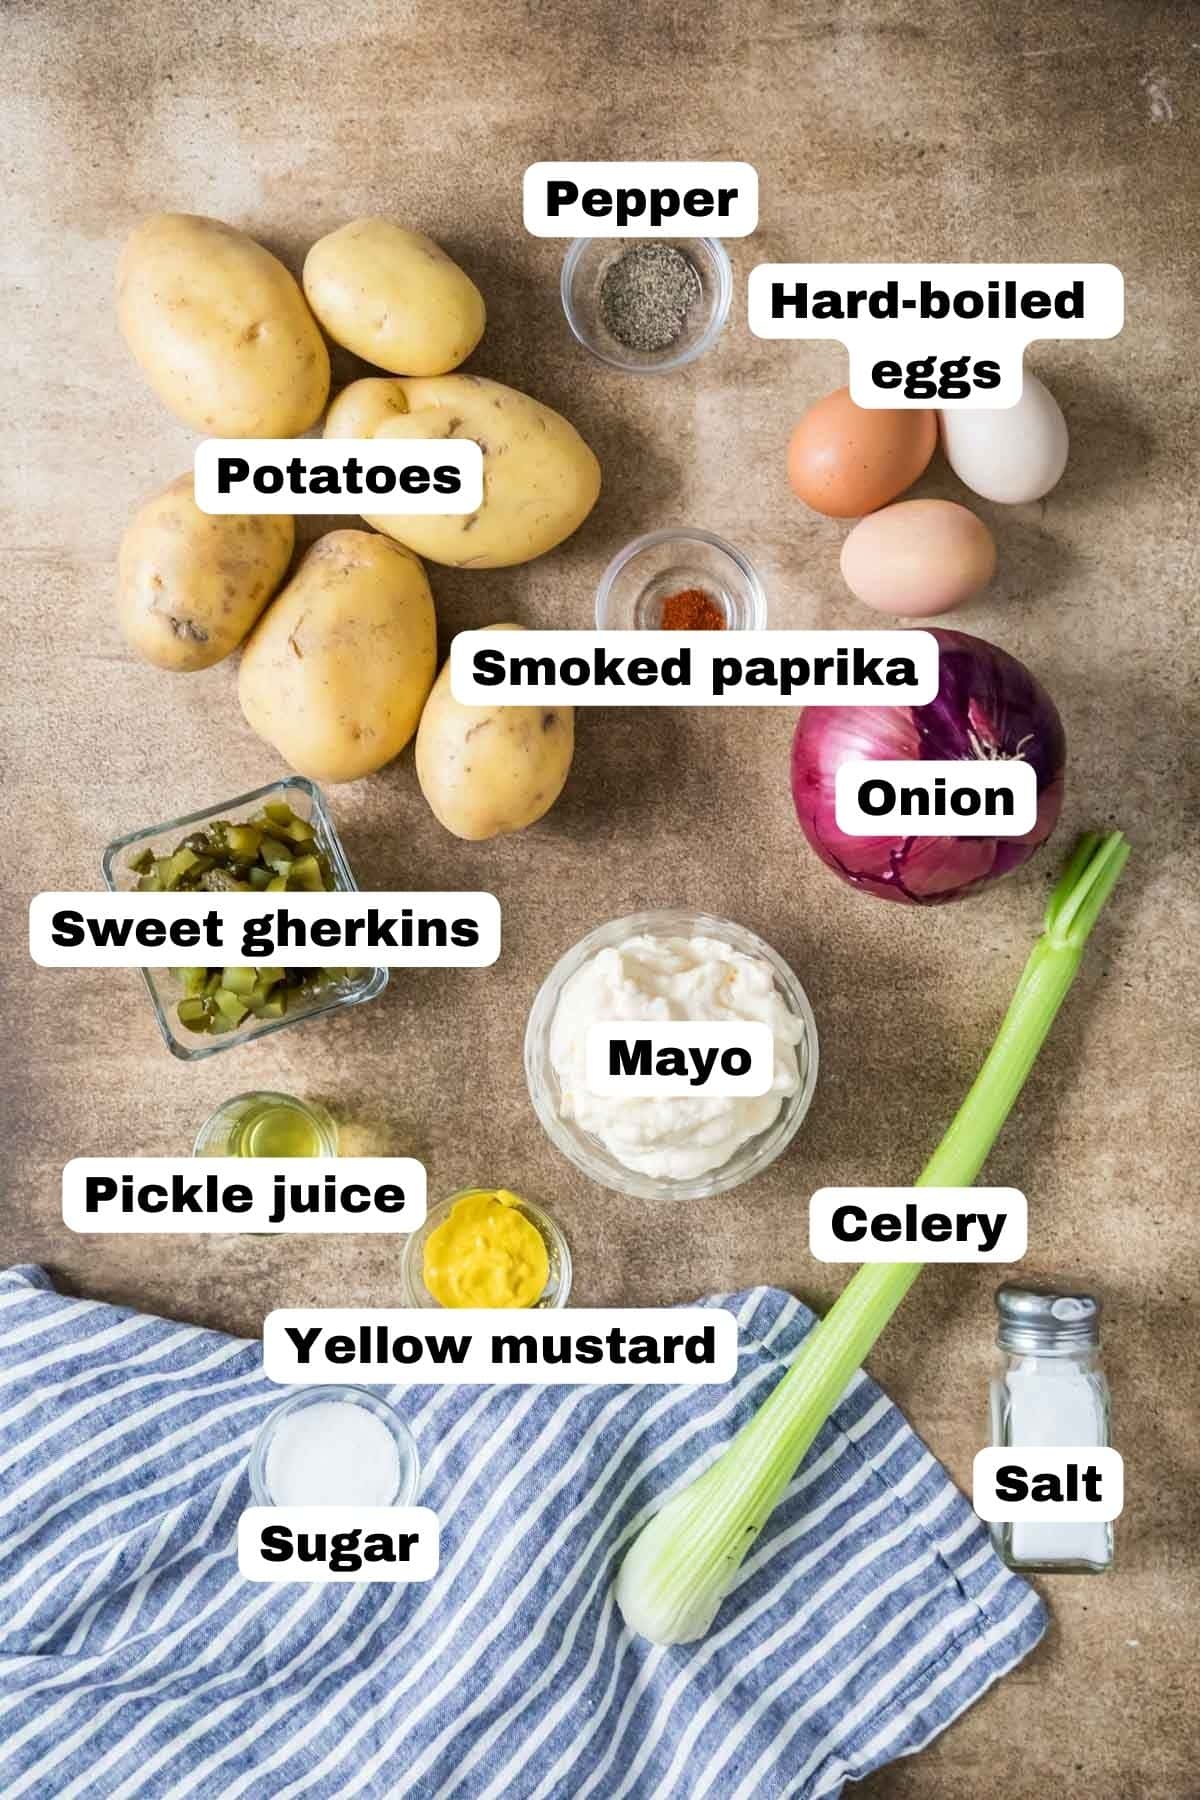 Overhead view of labeled ingredients including potatoes, red onions, celery, and more.